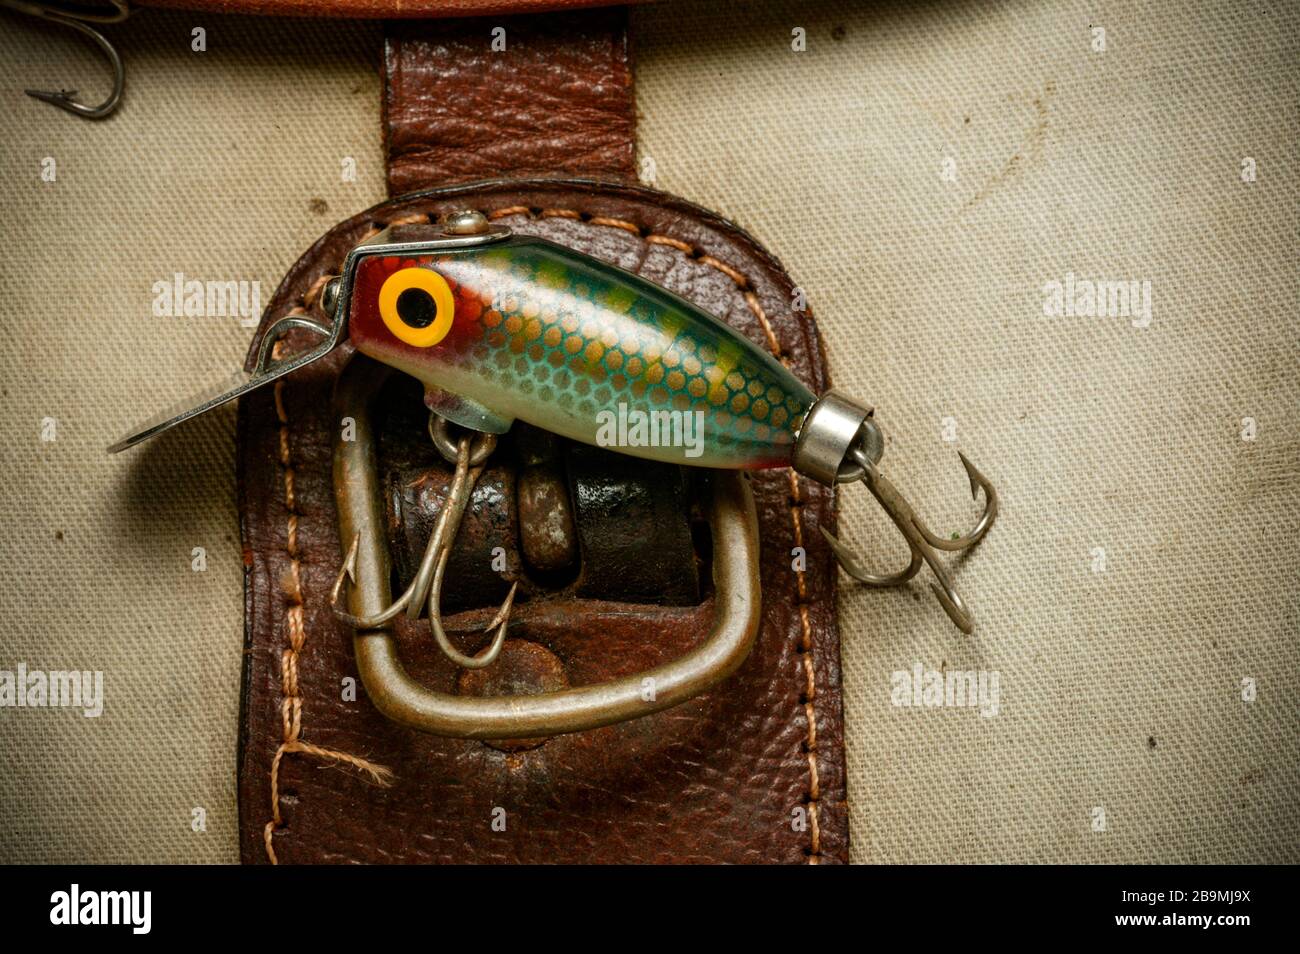 https://c8.alamy.com/comp/2B9MJ9X/an-example-of-a-vintage-fishing-lure-equipped-with-treble-hooks-possibly-made-by-woods-mfg-displayed-on-an-old-fishing-bag-lures-such-as-these-are-2B9MJ9X.jpg